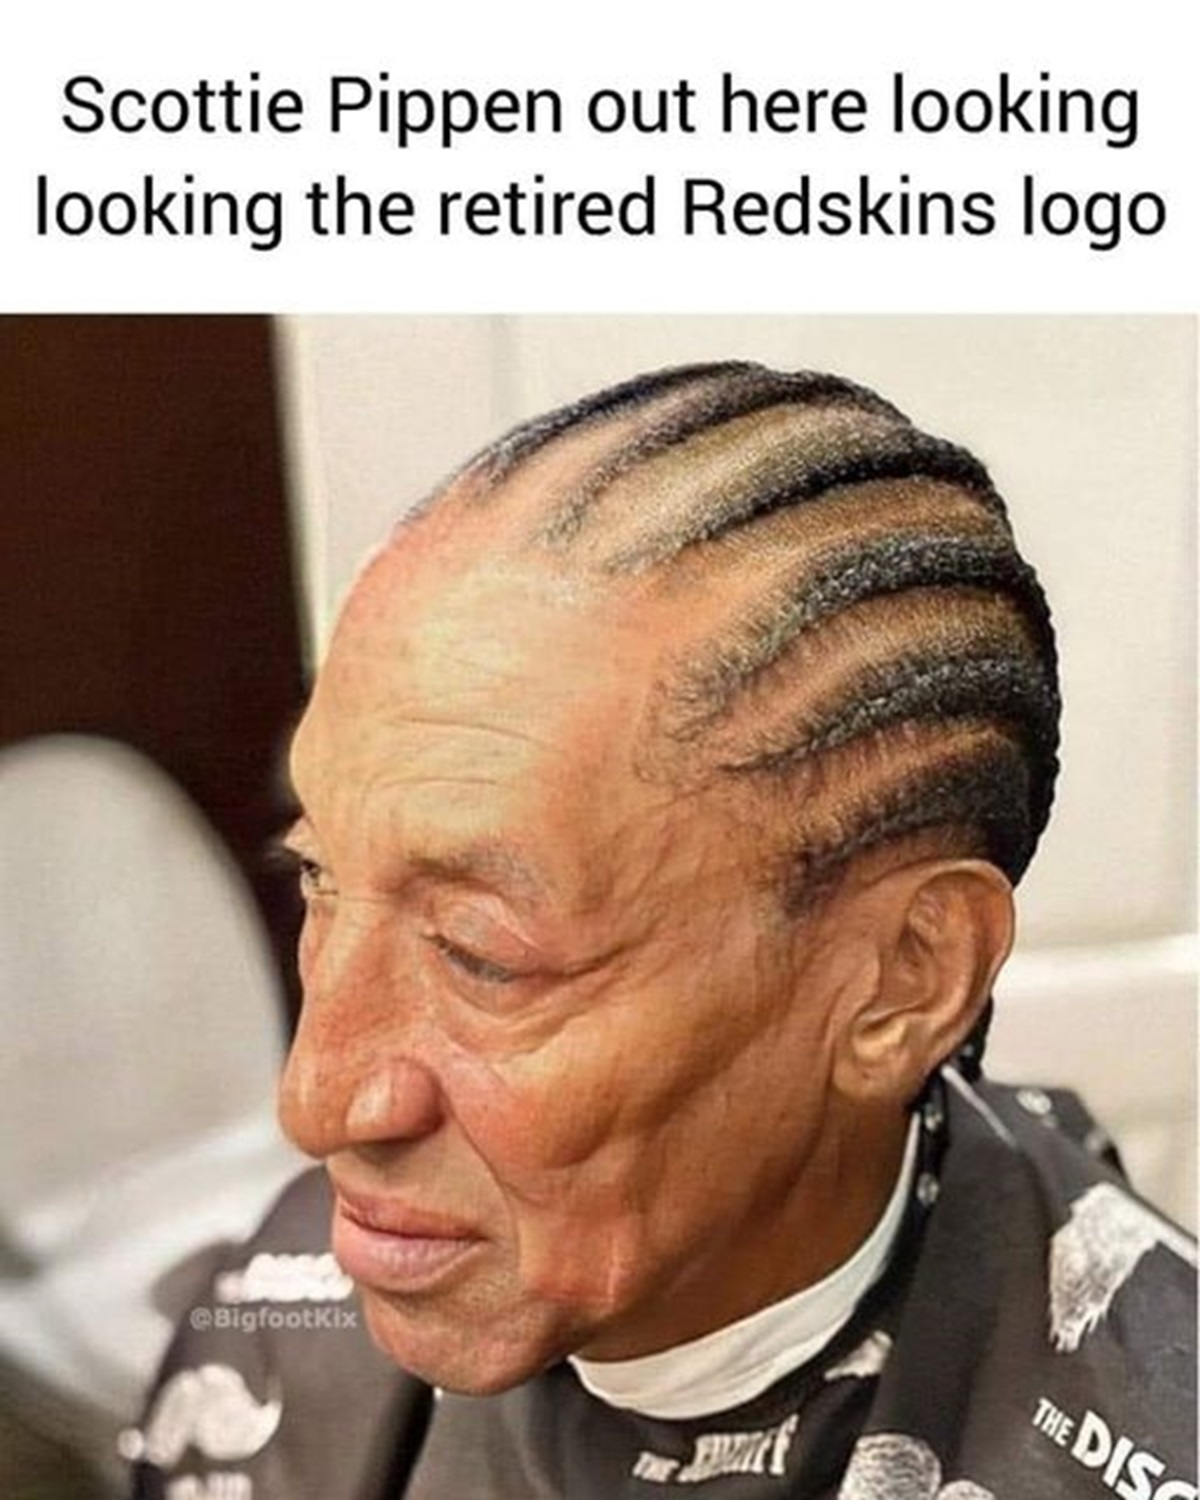 scottie pippen meme - Scottie Pippen out here looking looking the retired Redskins logo The The Dis